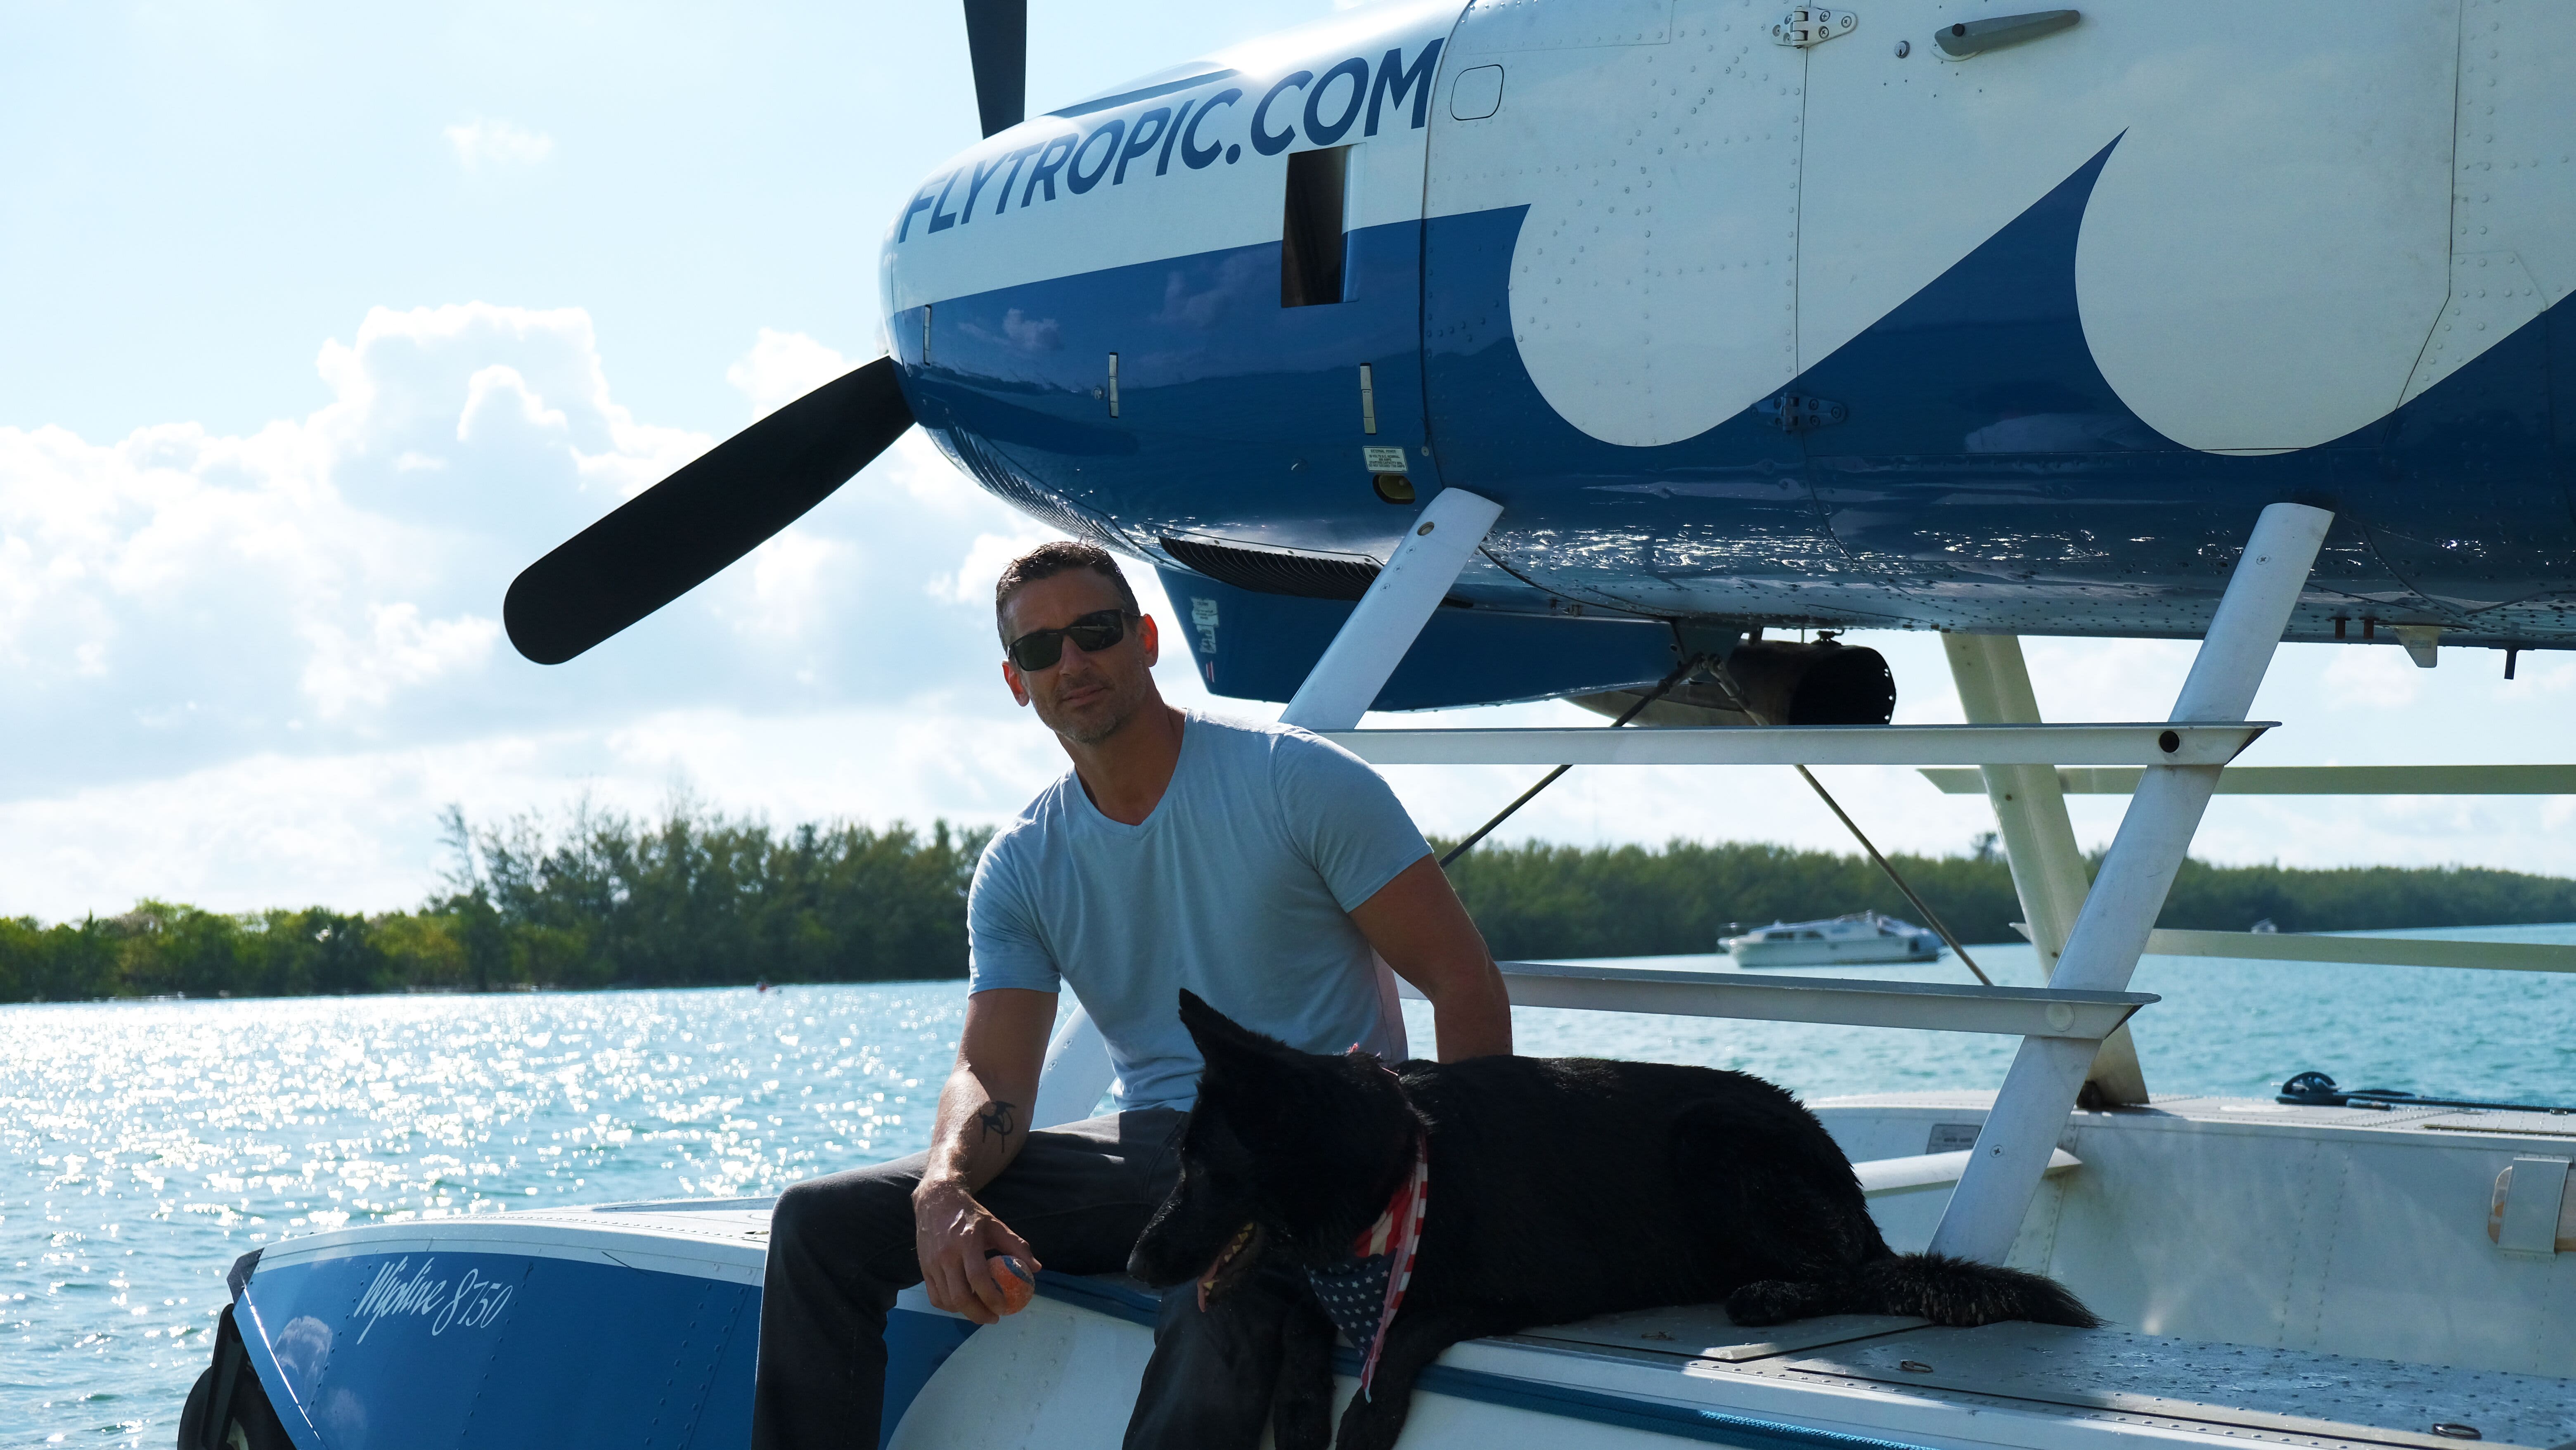 Ex-Navy fighter pilot built a $15 million seaplane business, thanks to skills he learned in the military - CNBC